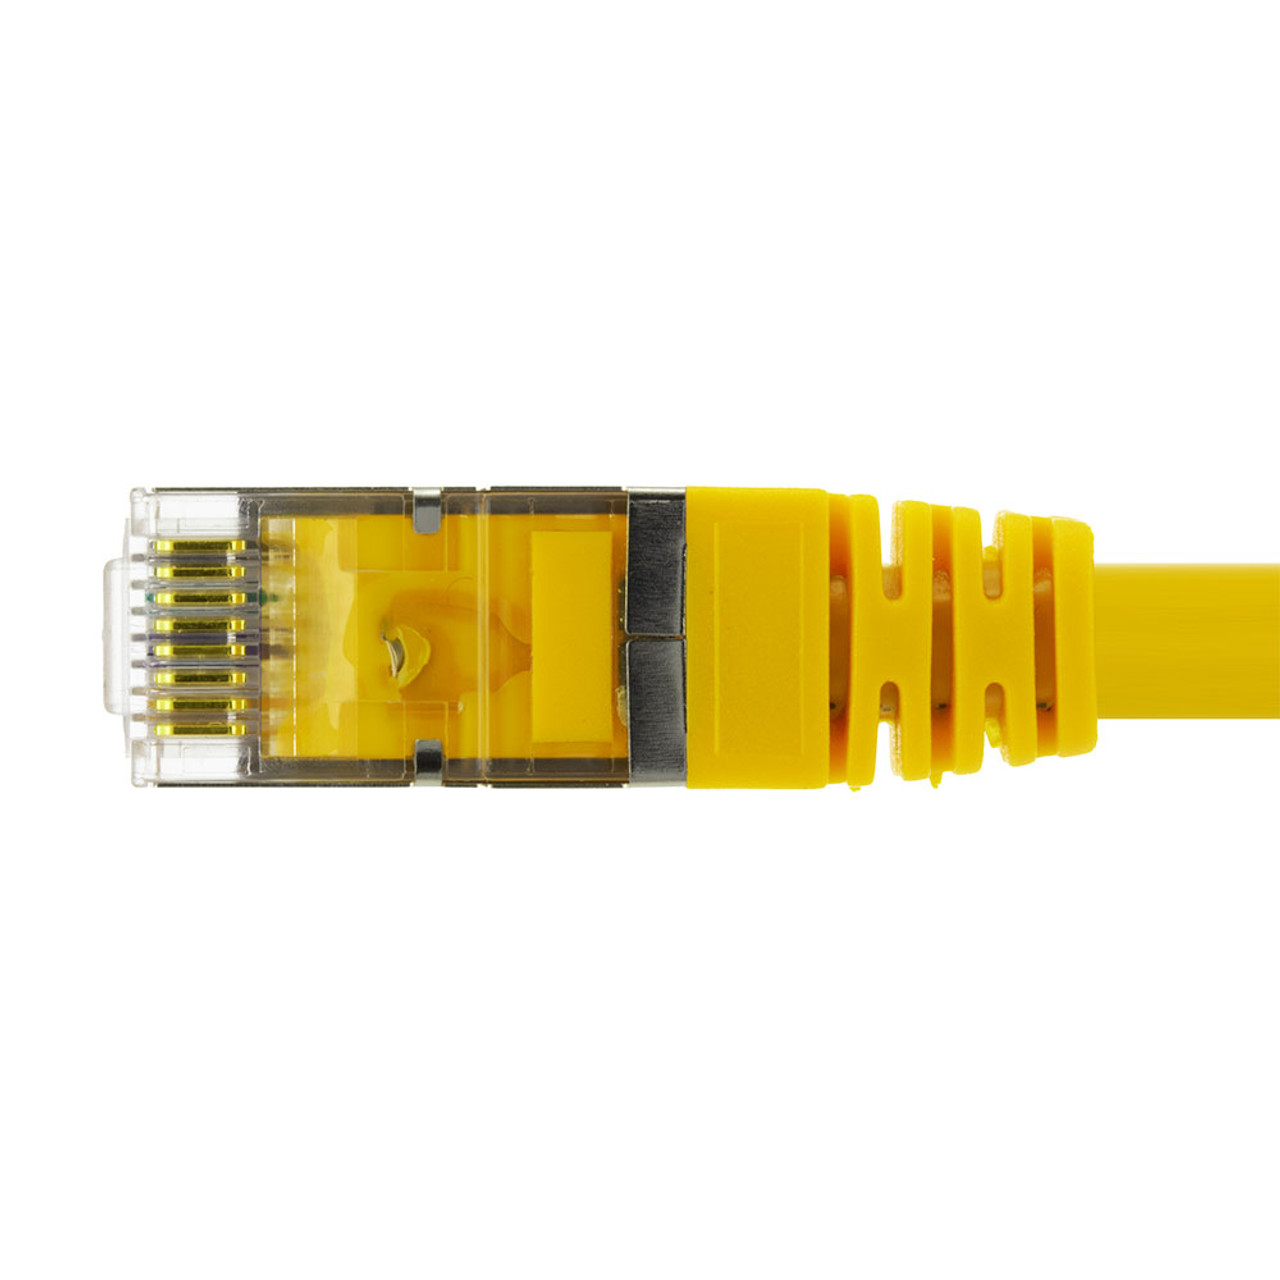 Ethernet Patch Cable CAT6, F/UTP, 26AWG, 10 Ft,  5 pack, Yellow